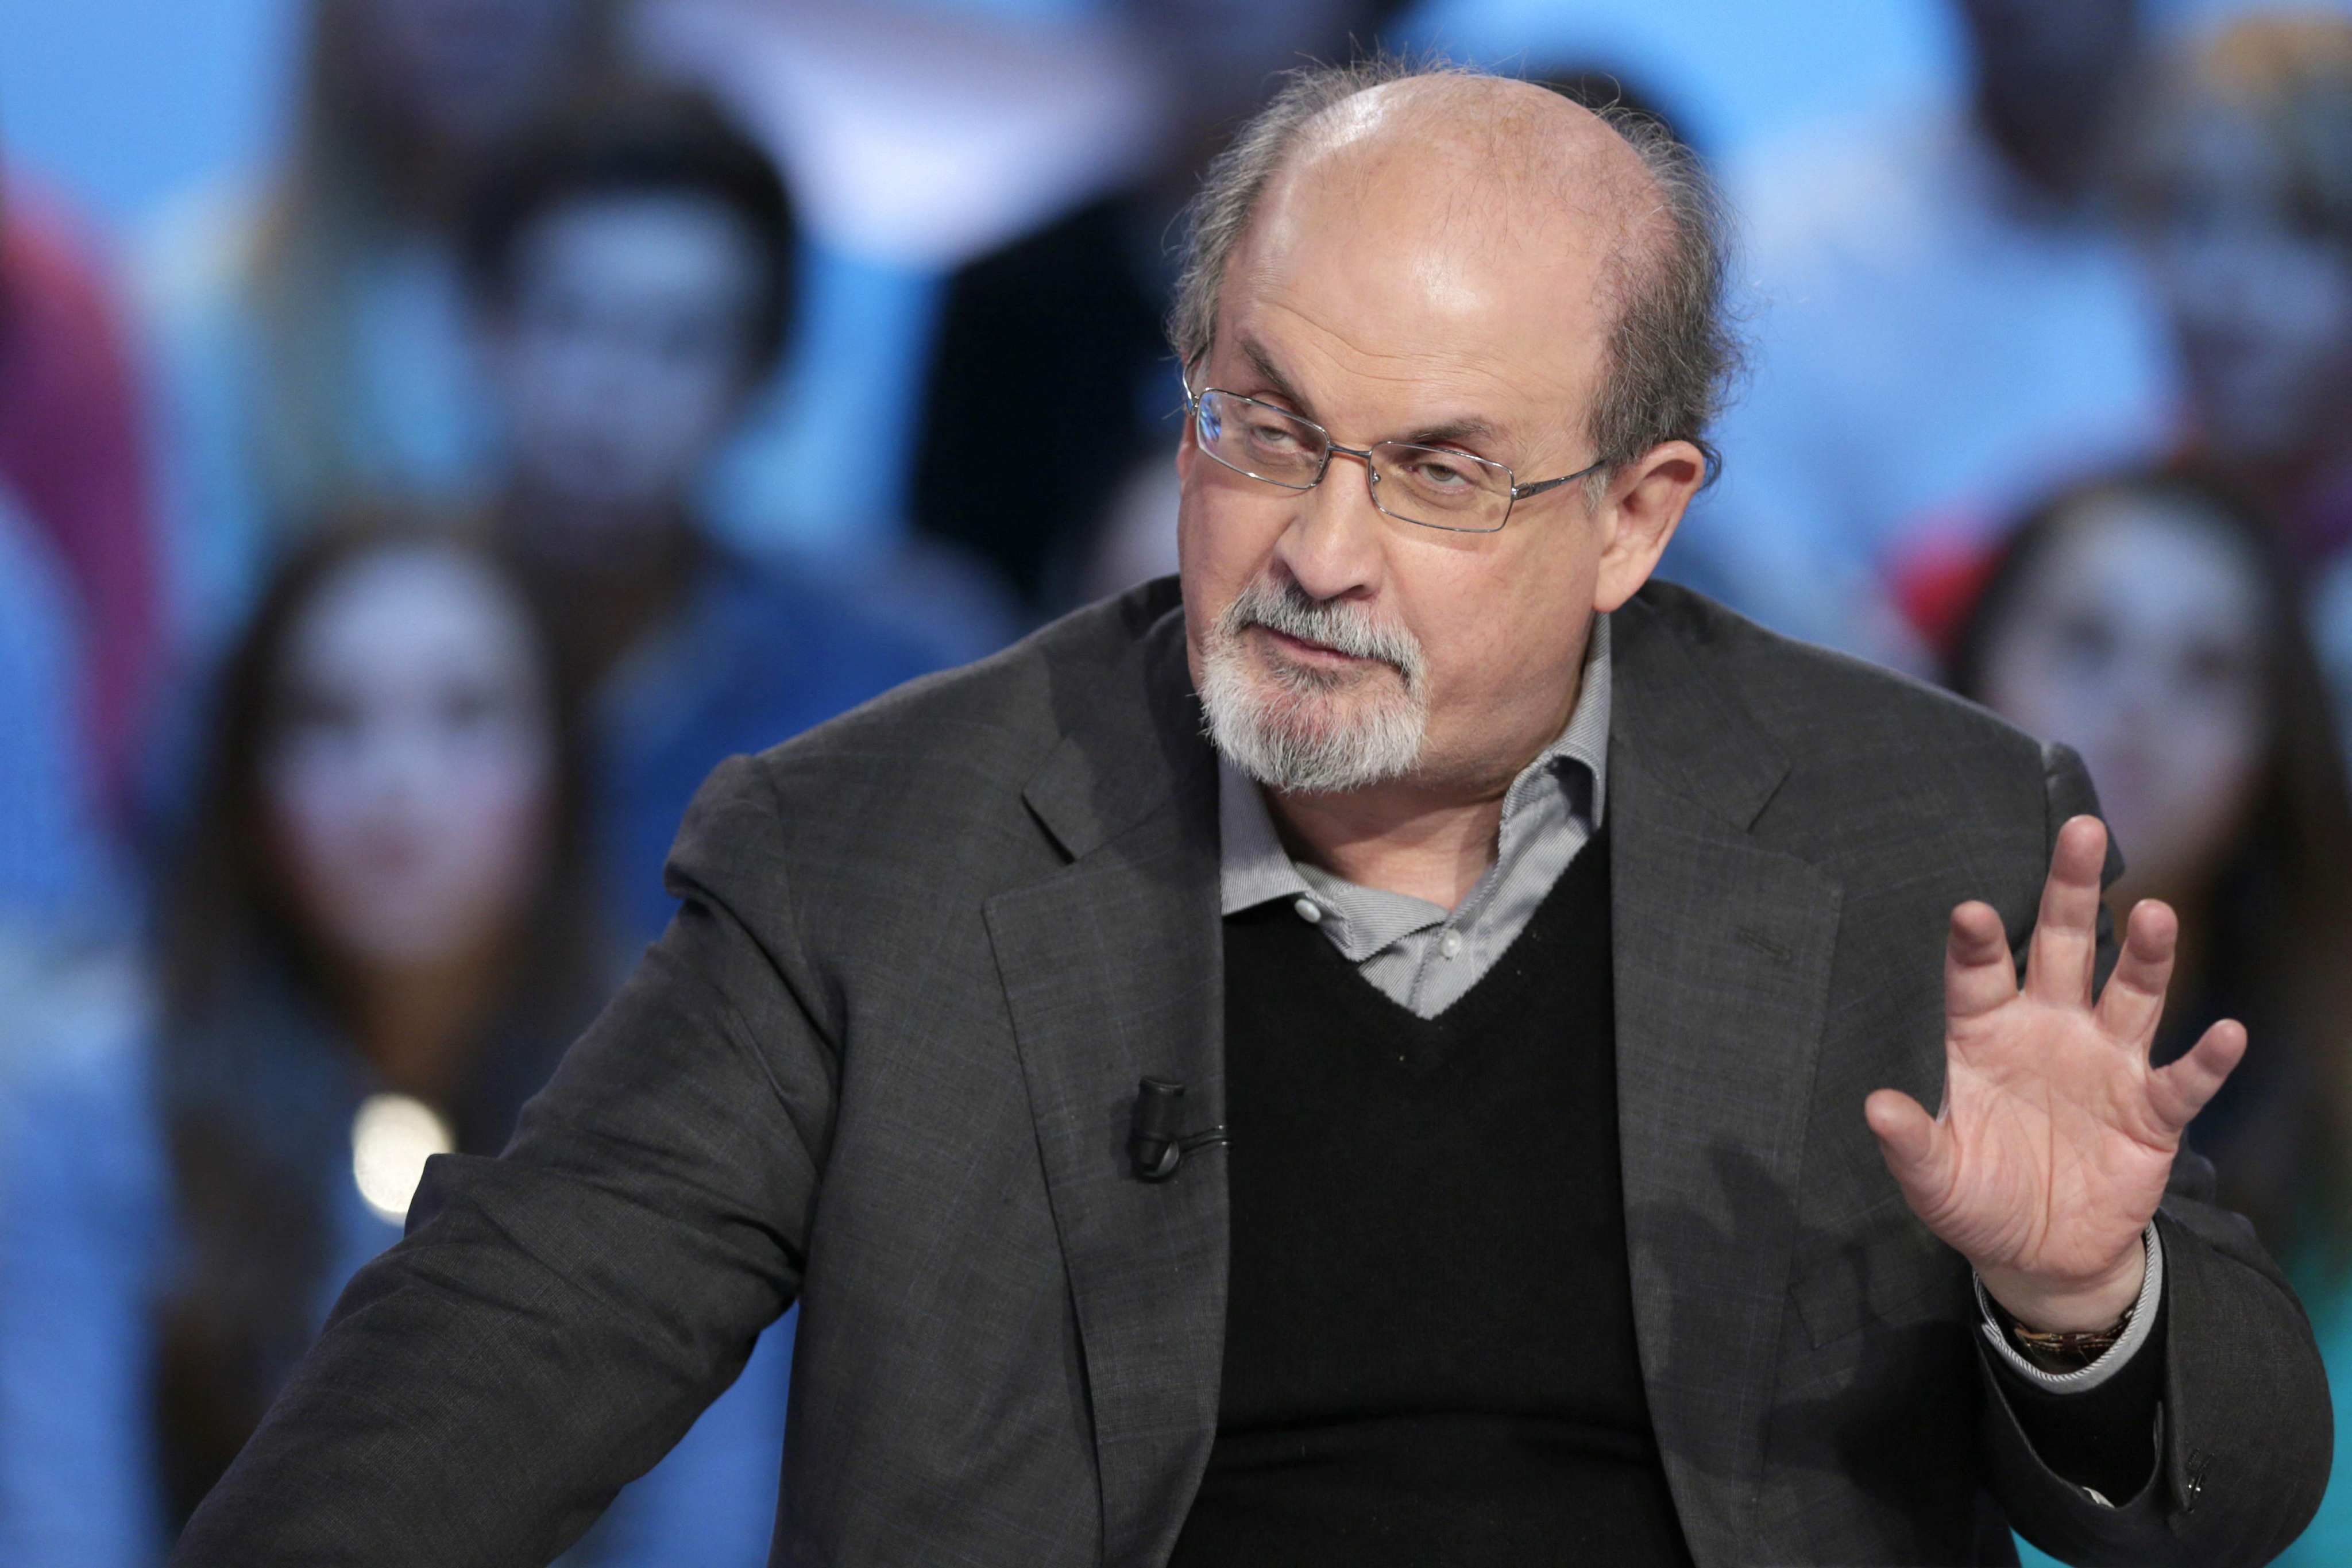 Many social media users in Indonesia, the world’s largest Muslim-majority nation have been praising the man who attacked author Salman Rushdie. Photo: AFP